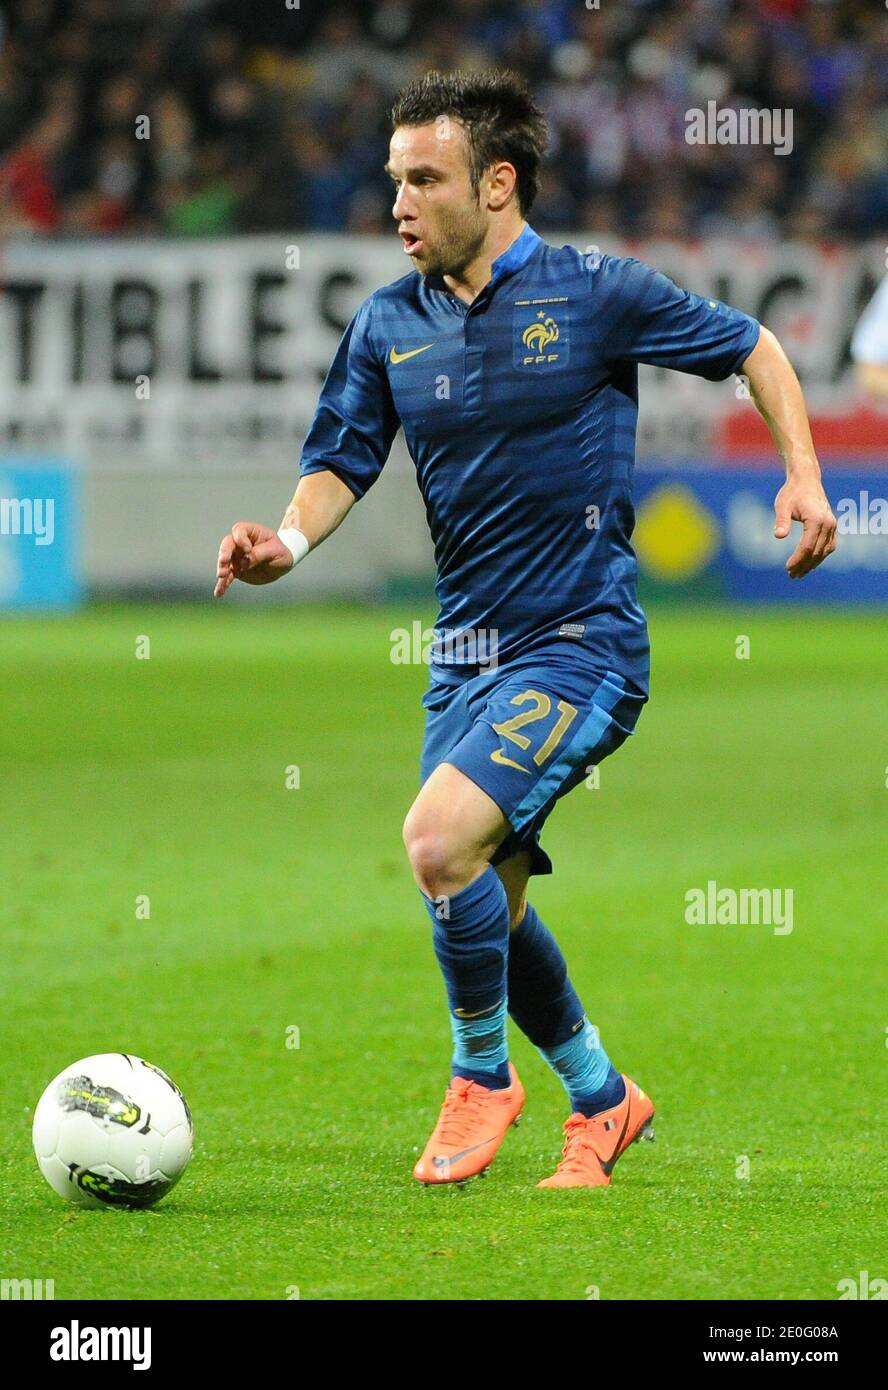 France's Mathieu Valbuena during an International Friendly soccer match, France Vs Estonia at MMArena stadium in Le Mans, France, on June 5, 2012. France won 4-0. Photo by ABACAPRESS.COM Stock Photo